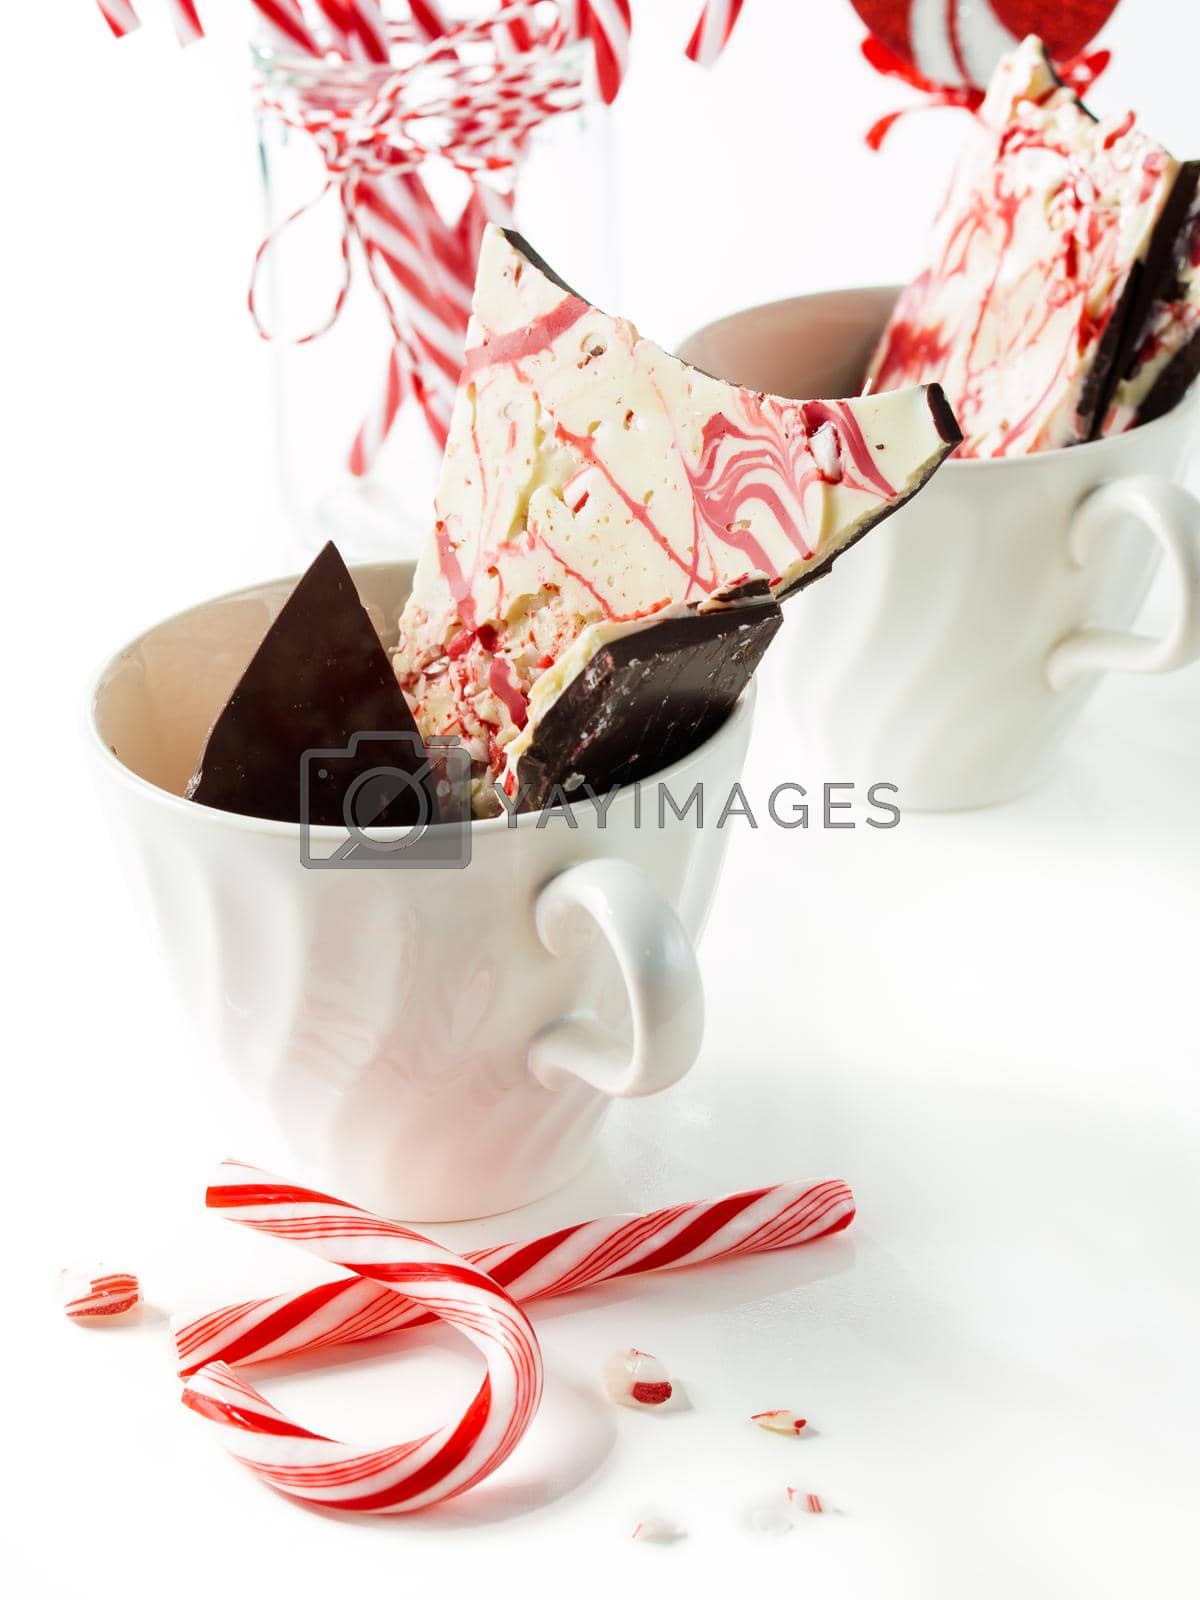 Royalty free image of Peppermint Bark by arinahabich